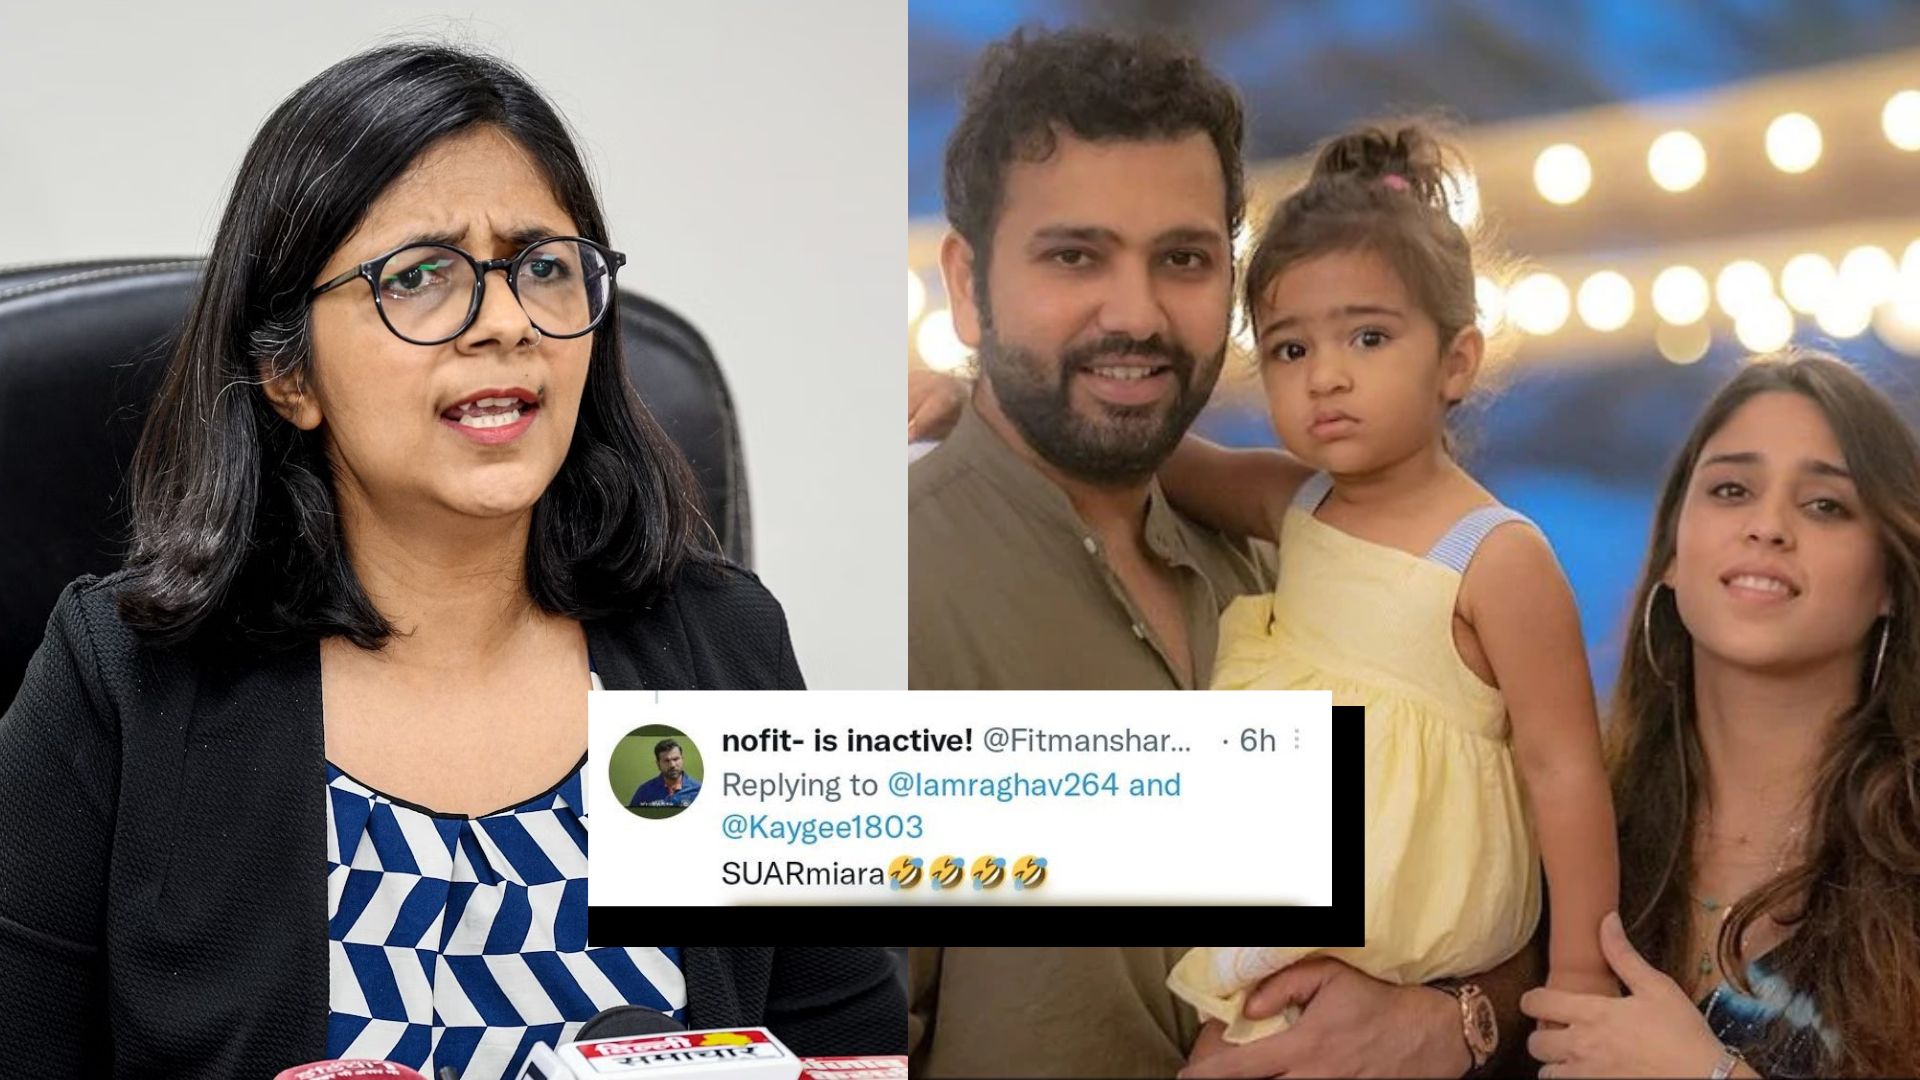 DCW’s Swati Maliwal Questions Police Over Vulgar Comments On Rohit Sharma’s Wife, Daughter